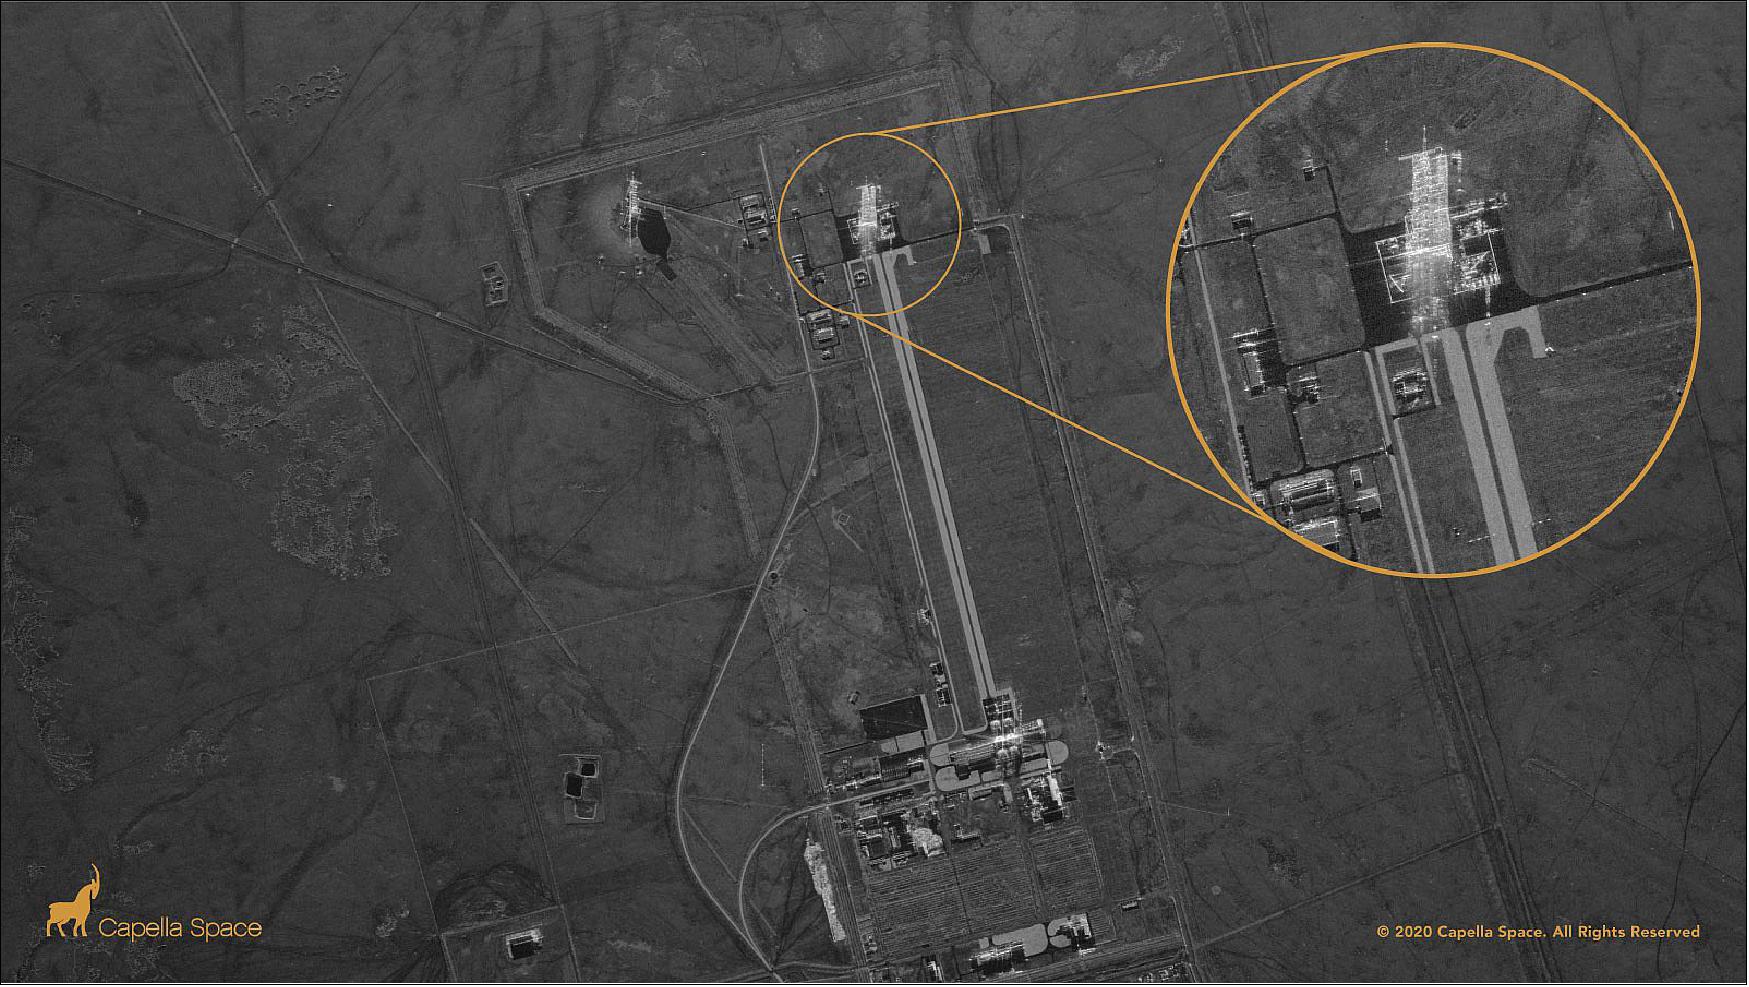 Figure 21: Capella’s new Spot imagery captures the Jiuquan Launch Center where China recently launched its new commercial CERES-1 rocket. The spaceport’s launch pad areas and vertical assembly area are clearly visible in the radar image and a zoomed in version shows a closeup of the launch pad (image credit: Capella Space)